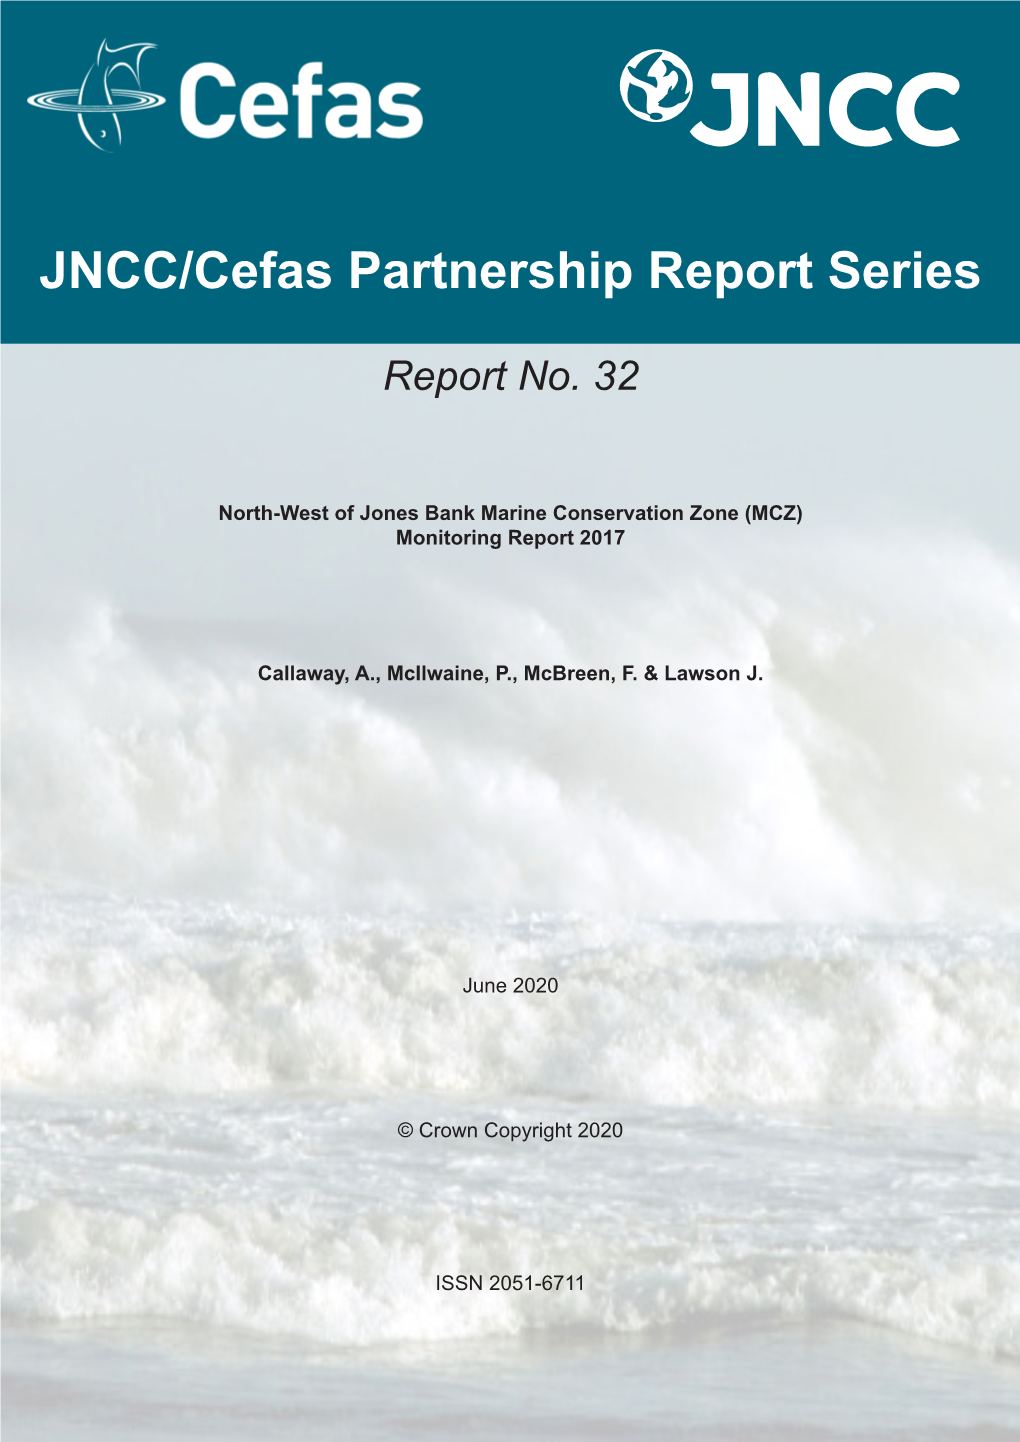 North-West of Jones Bank Marine Conservation Zone (MCZ) Monitoring Report 2017